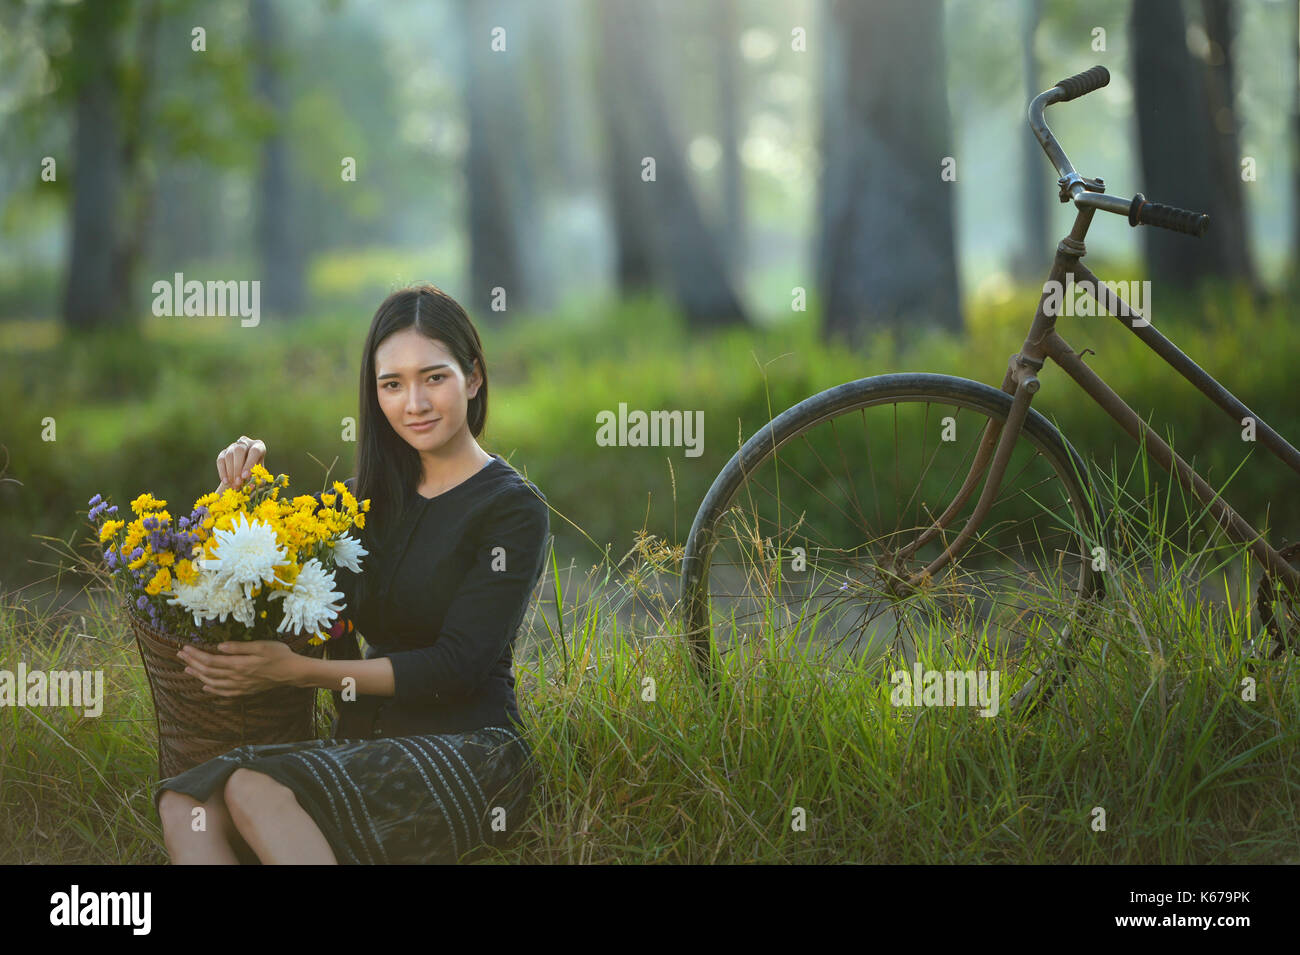 Woman sitting with a basket of flowers, Thailand Stock Photo